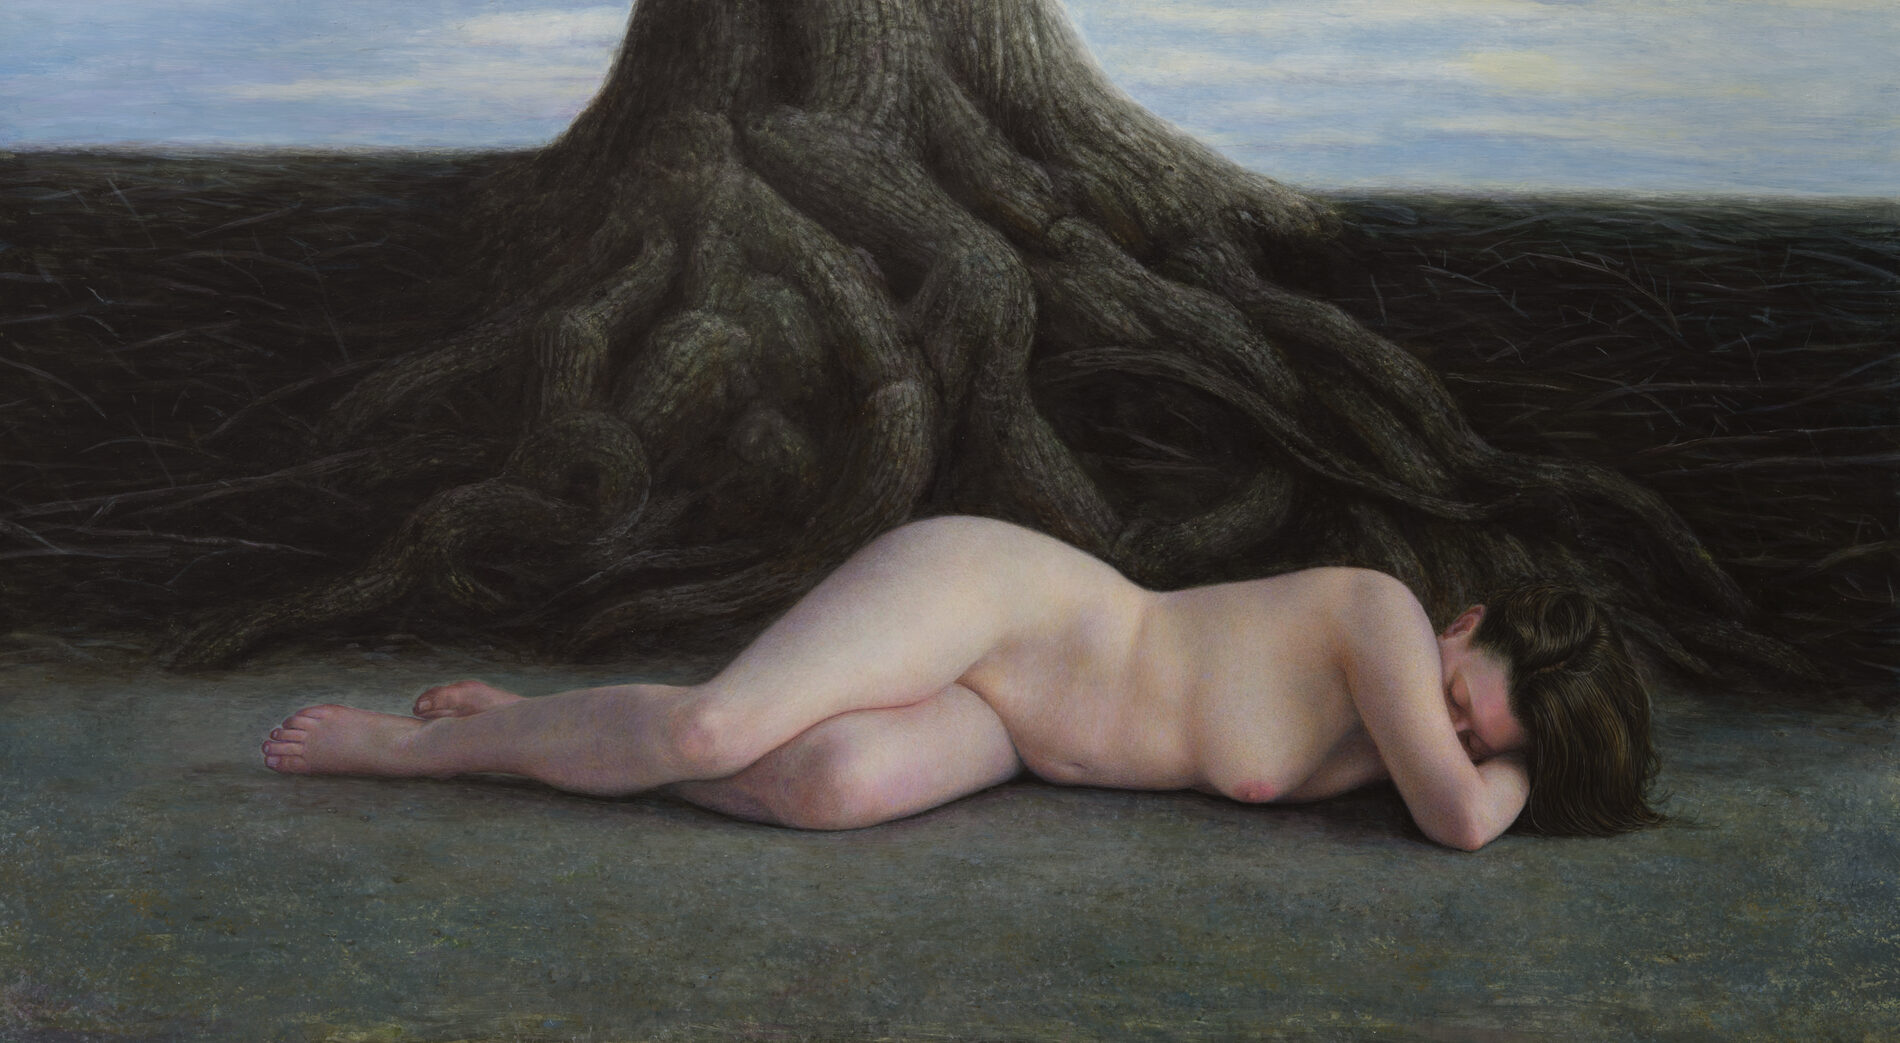 A nude woman laying at the base of a large tree with exposed roots.